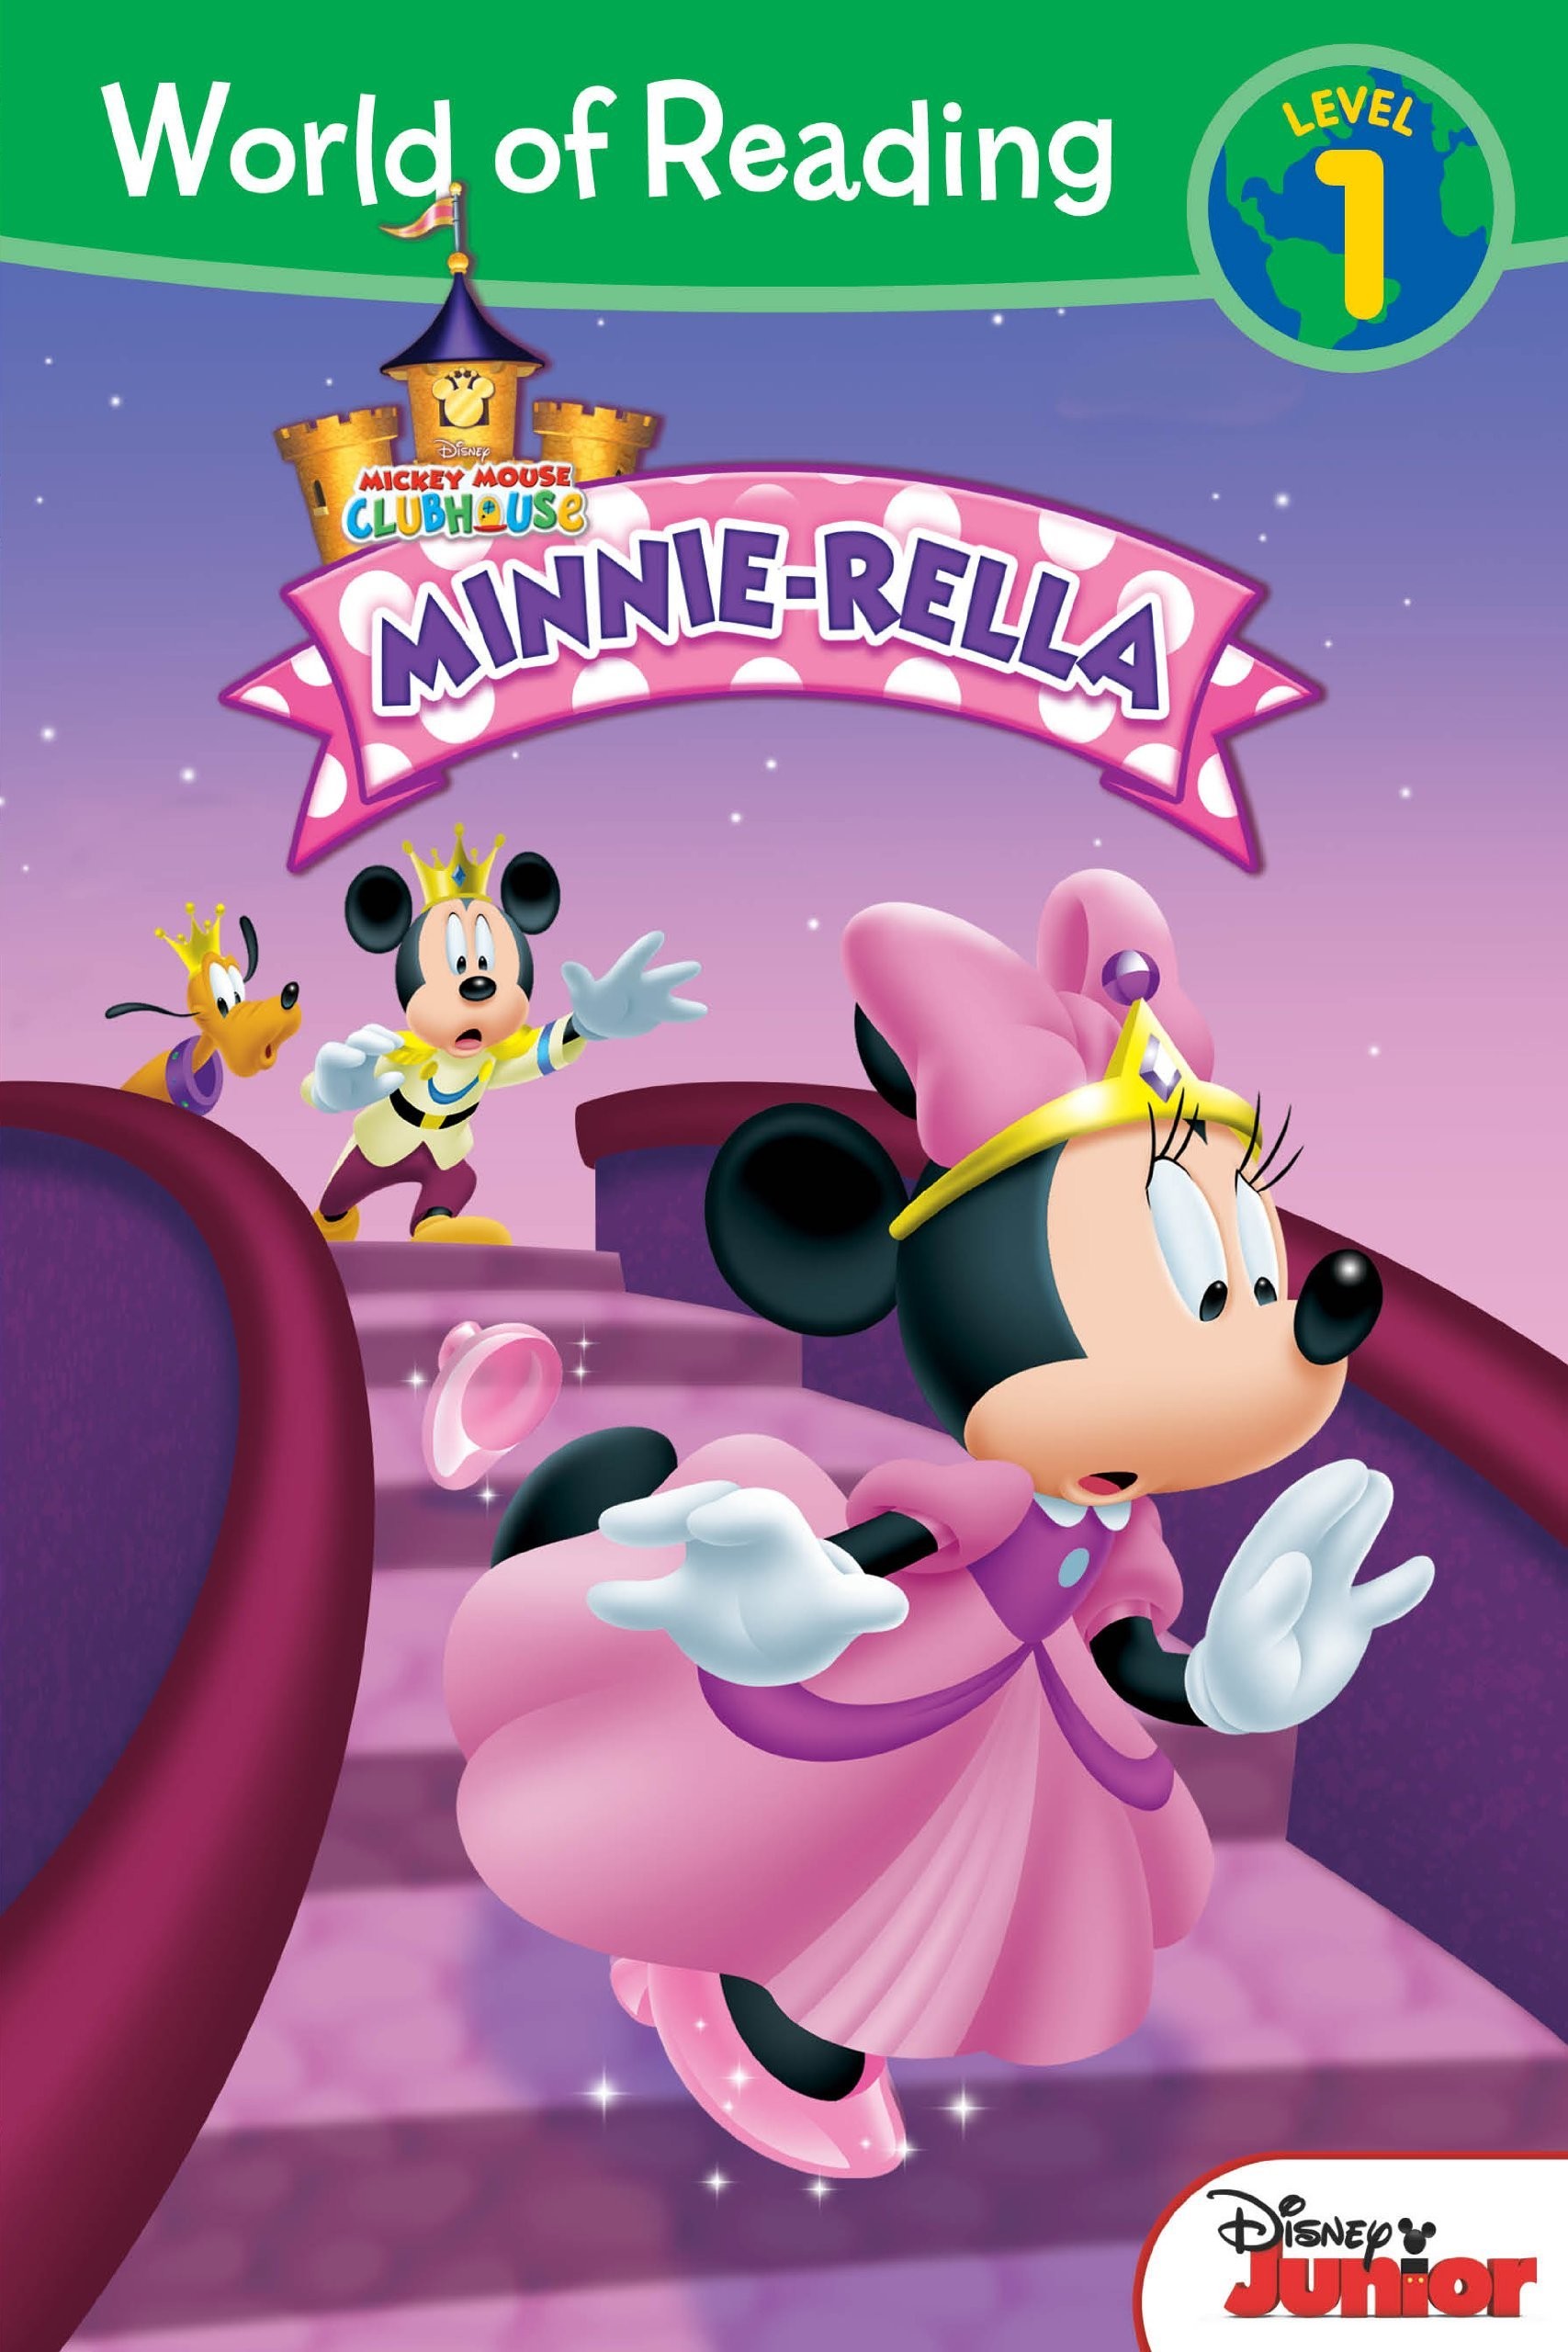 1707x2560 Mickey Mouse Clubhouse images Minnie-Rella (Book) HD wallpaper and  background photos